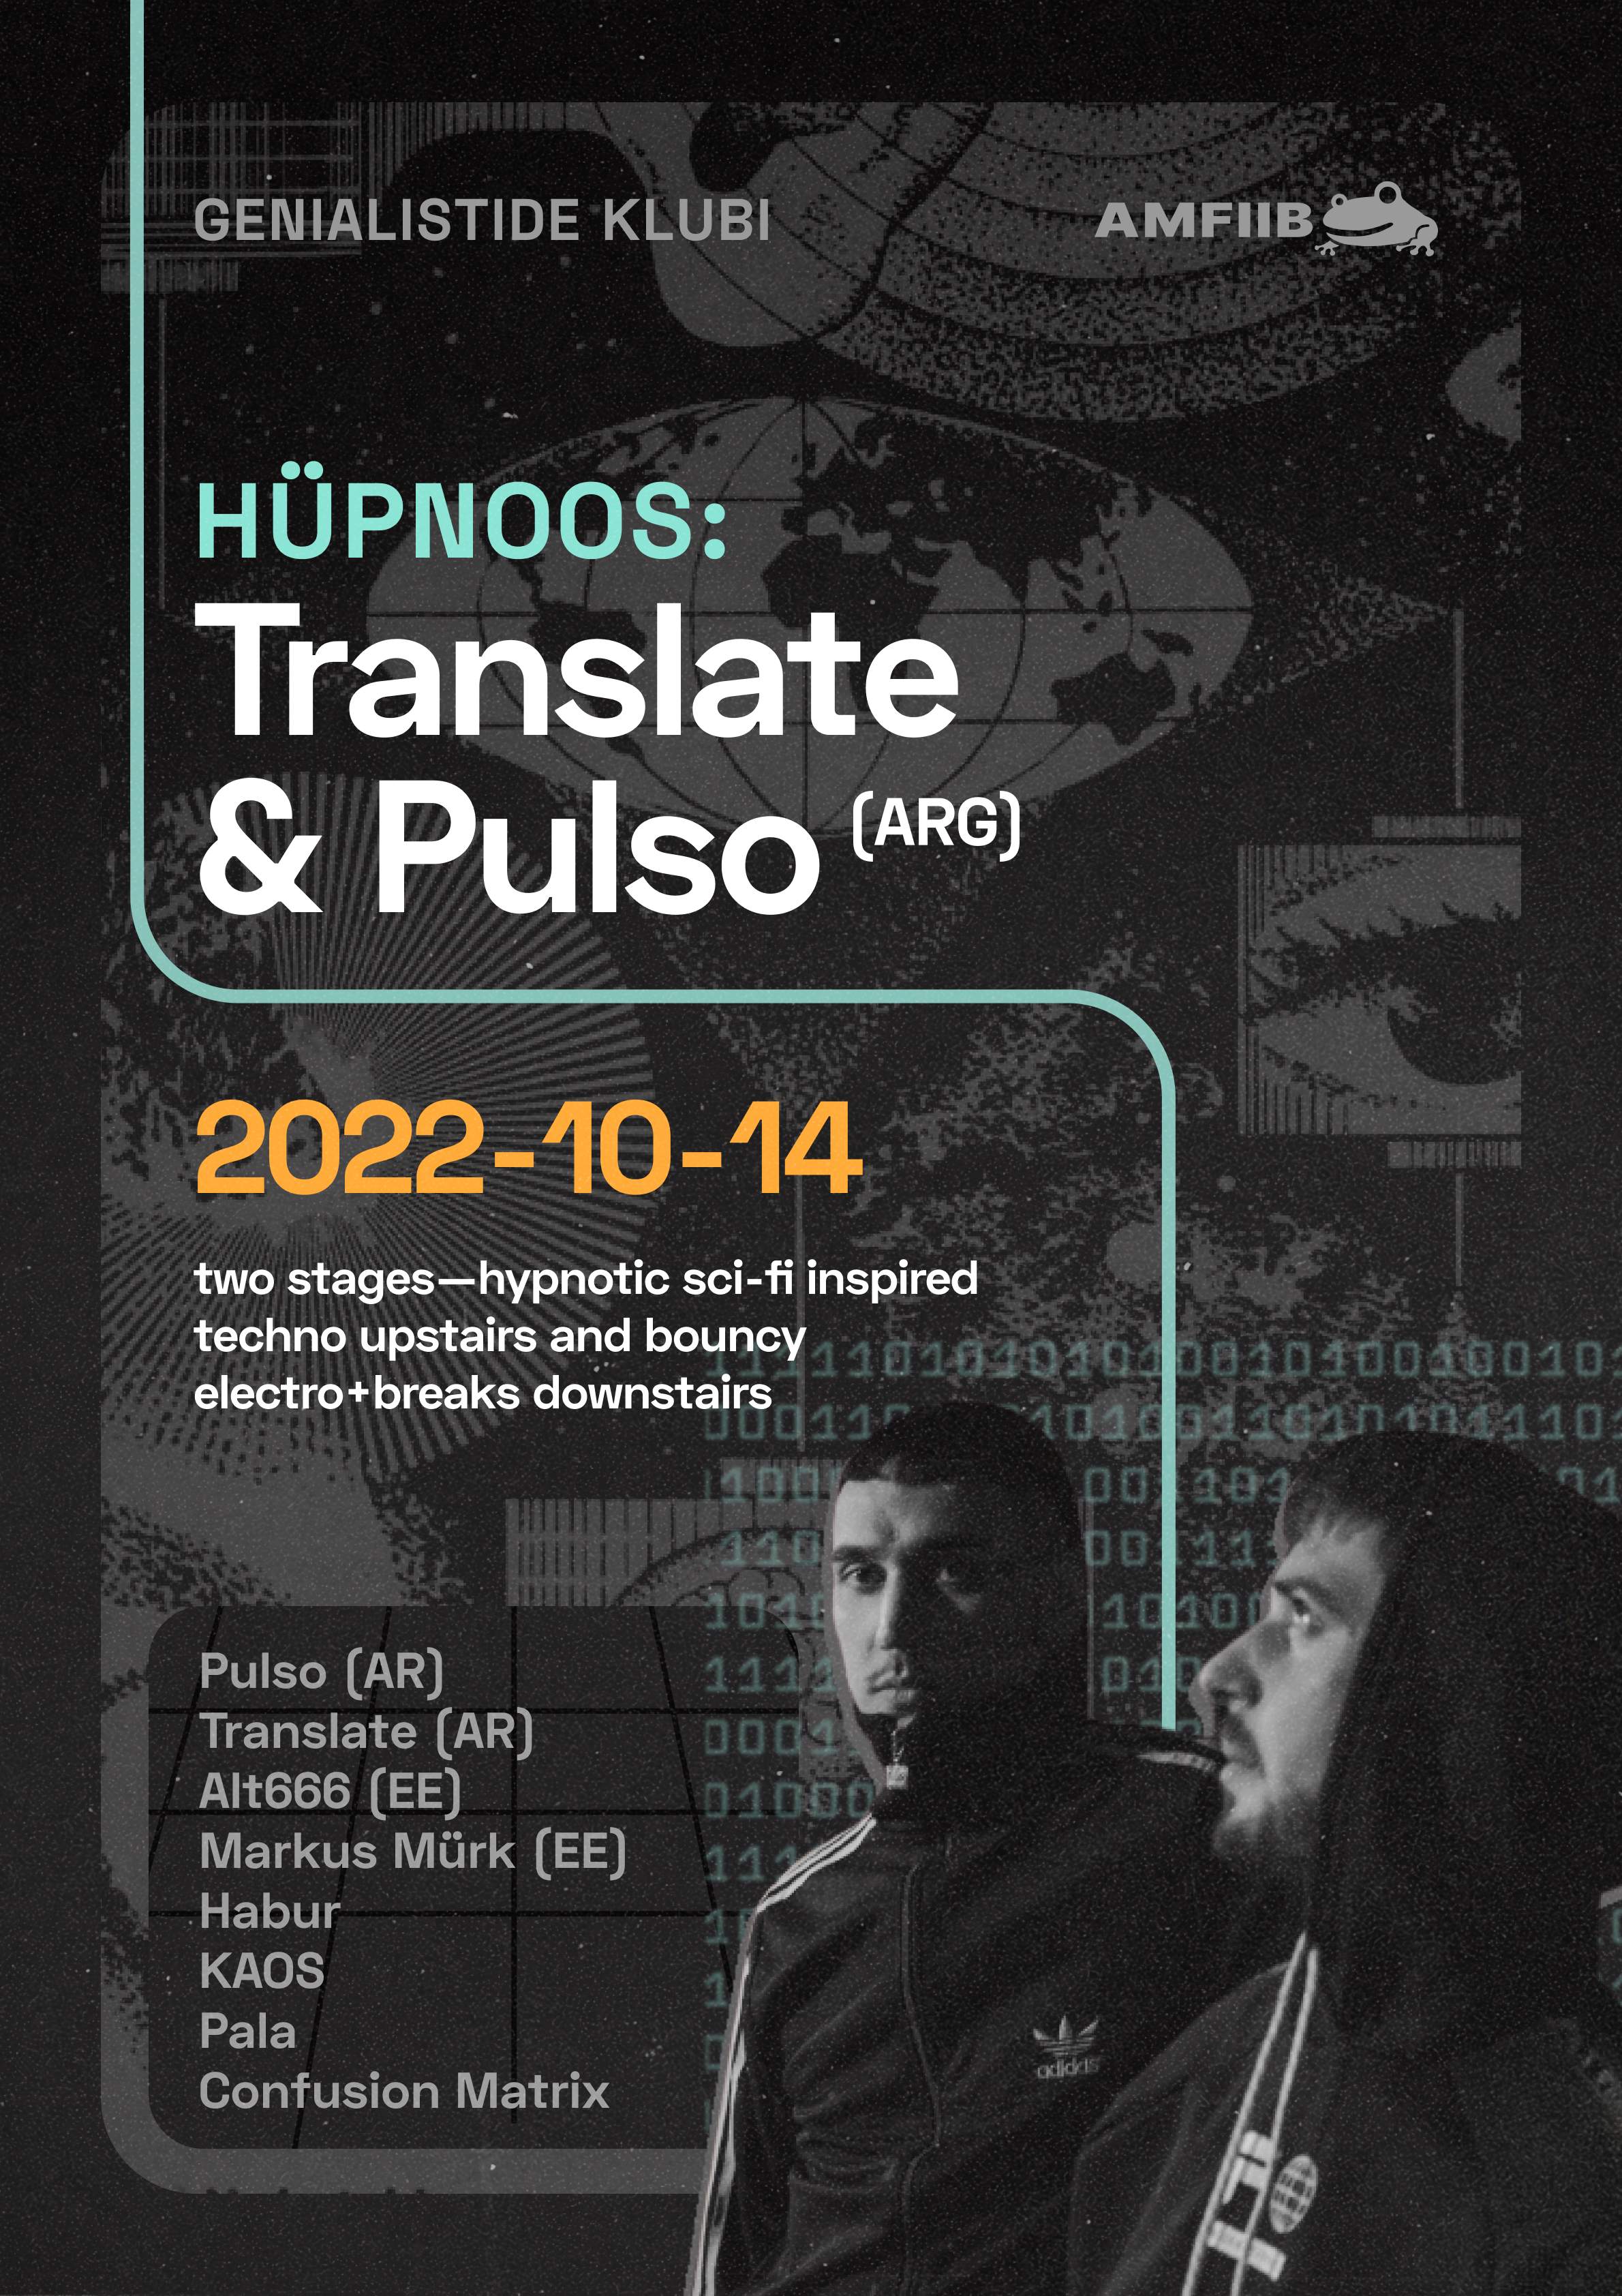 Hüpnoos: Translate & Pulso - フライヤー表